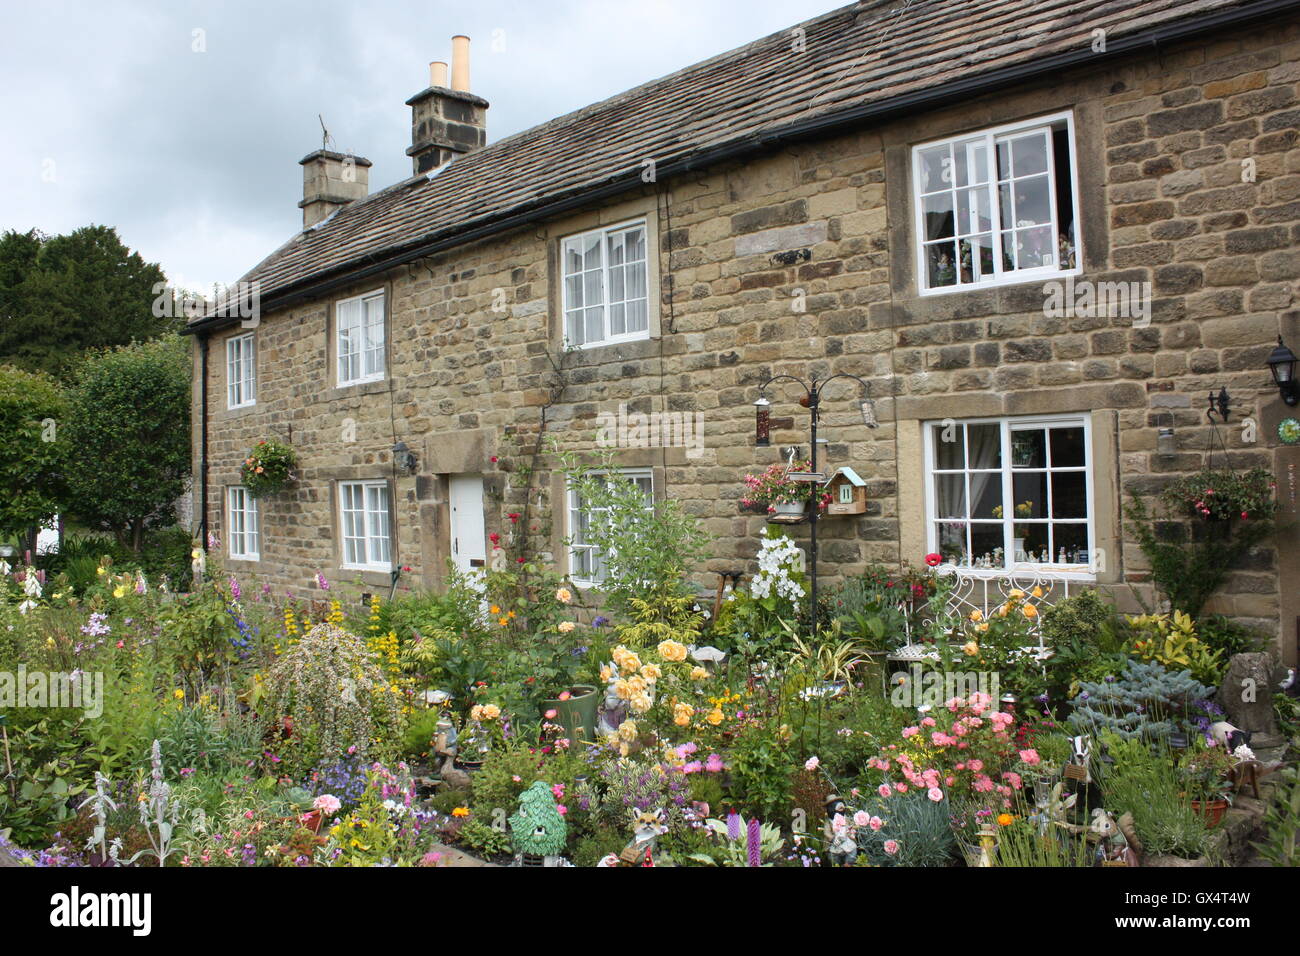 The plague cottages in Eyam, Derbyshire, England Stock Photo